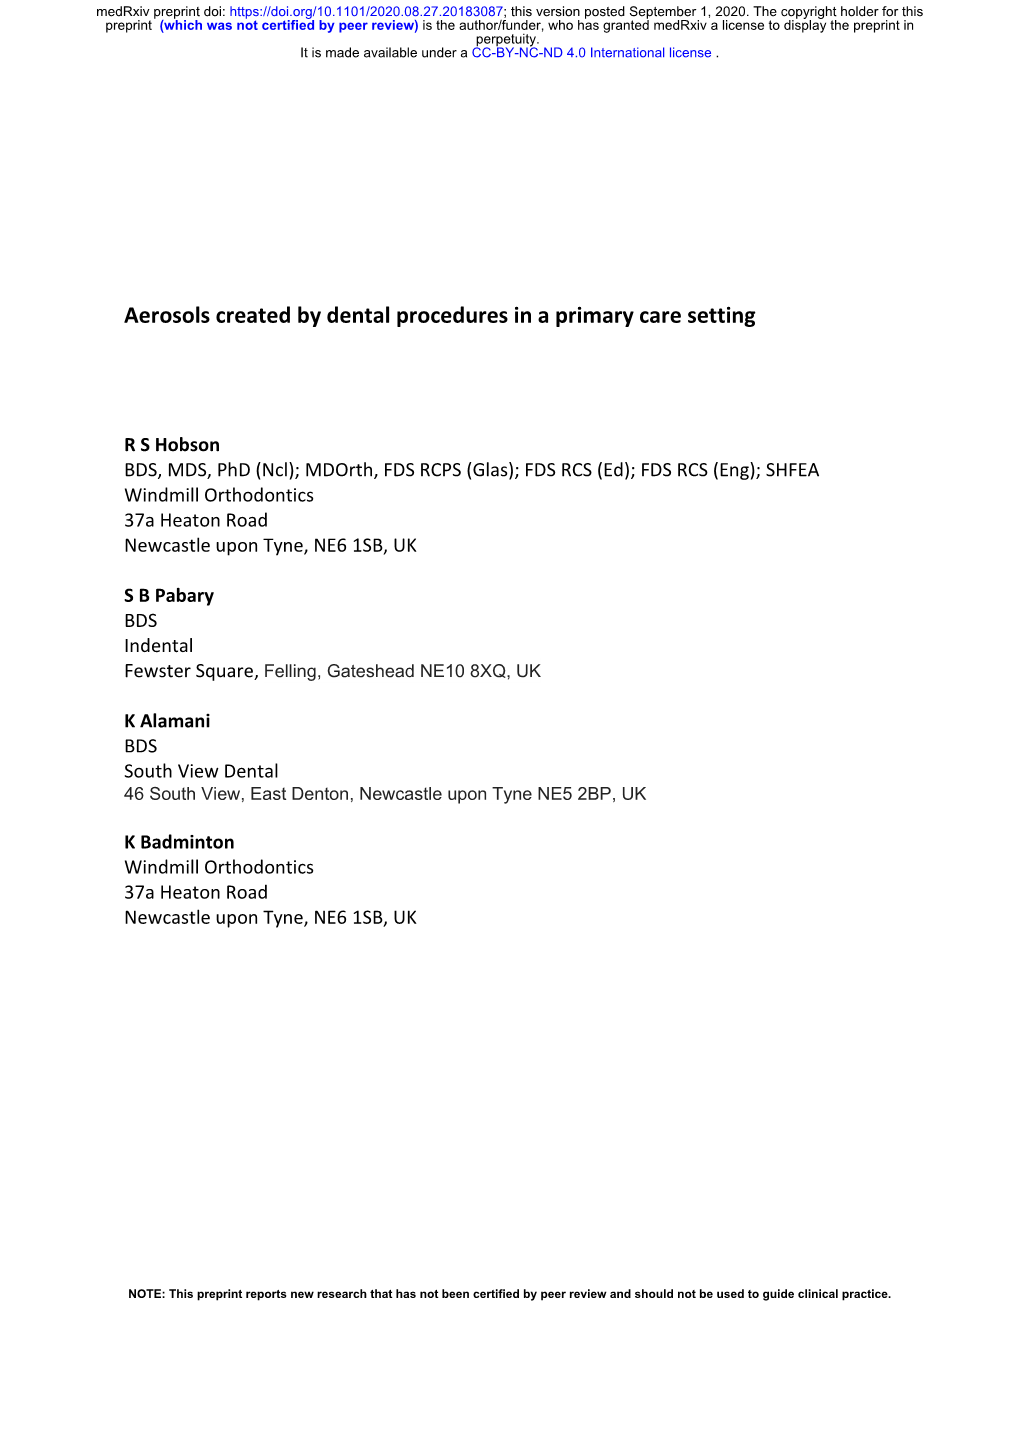 Aerosols Created by Dental Procedures in a Primary Care Setting